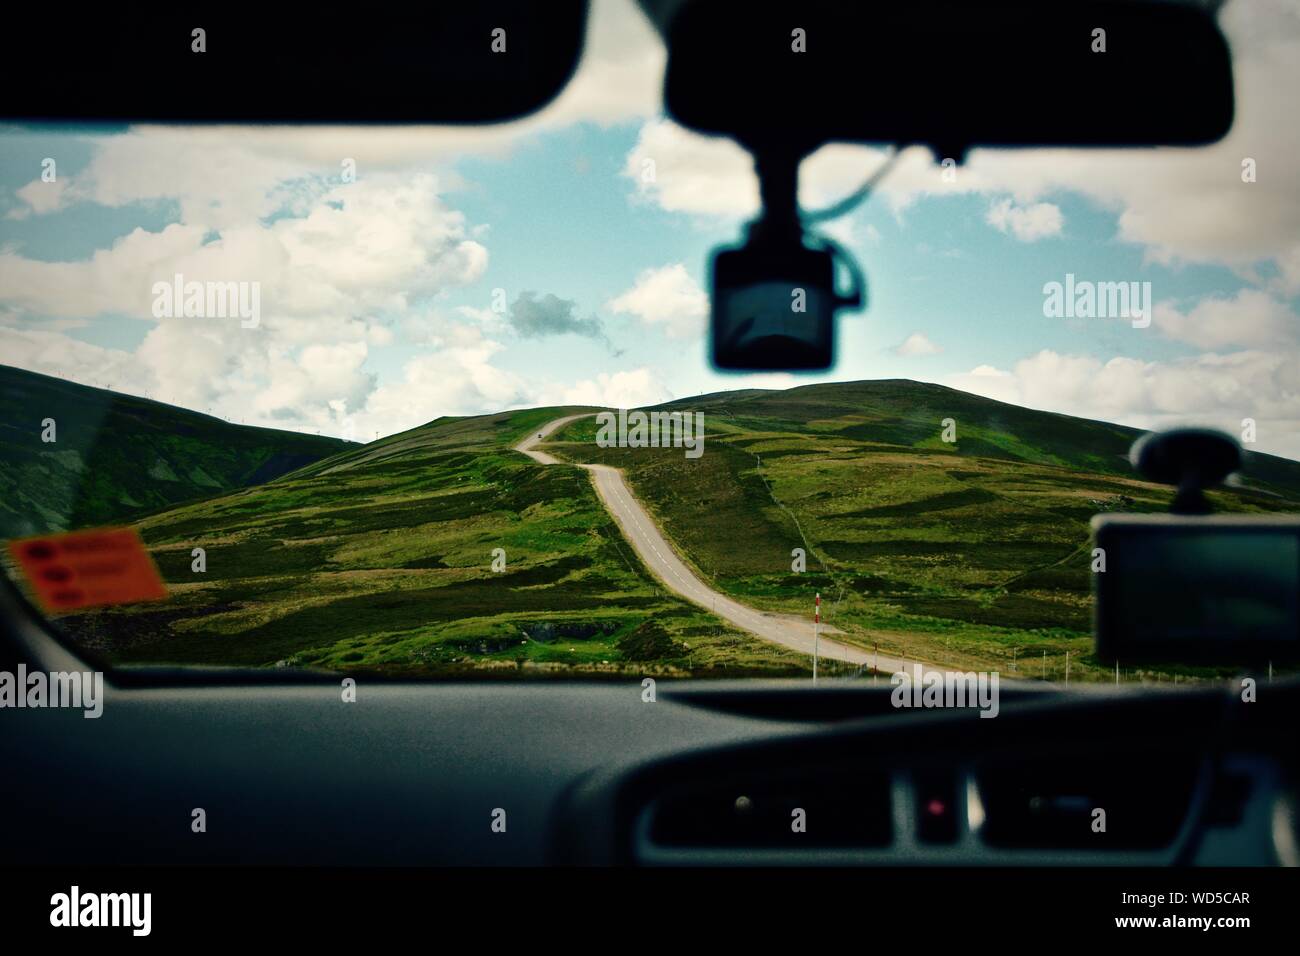 Country Road And Hilly Landscape View From Car Stock Photo